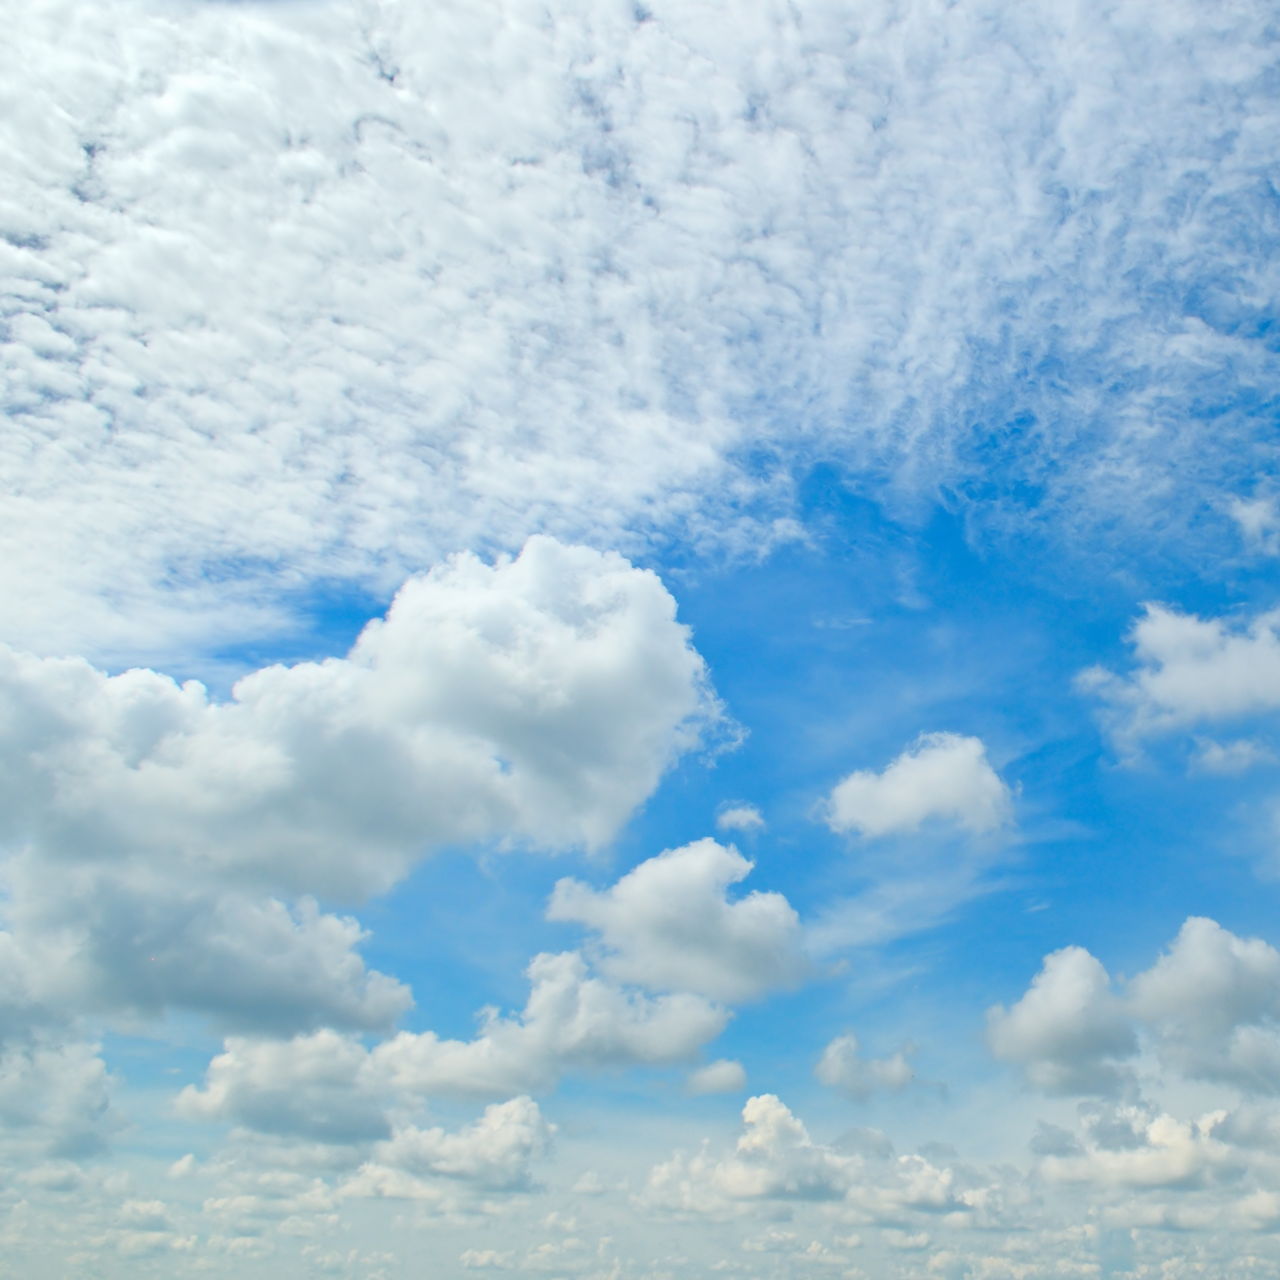 These Facts About the Cumulus Clouds are Freaking Awesome - Science Struck